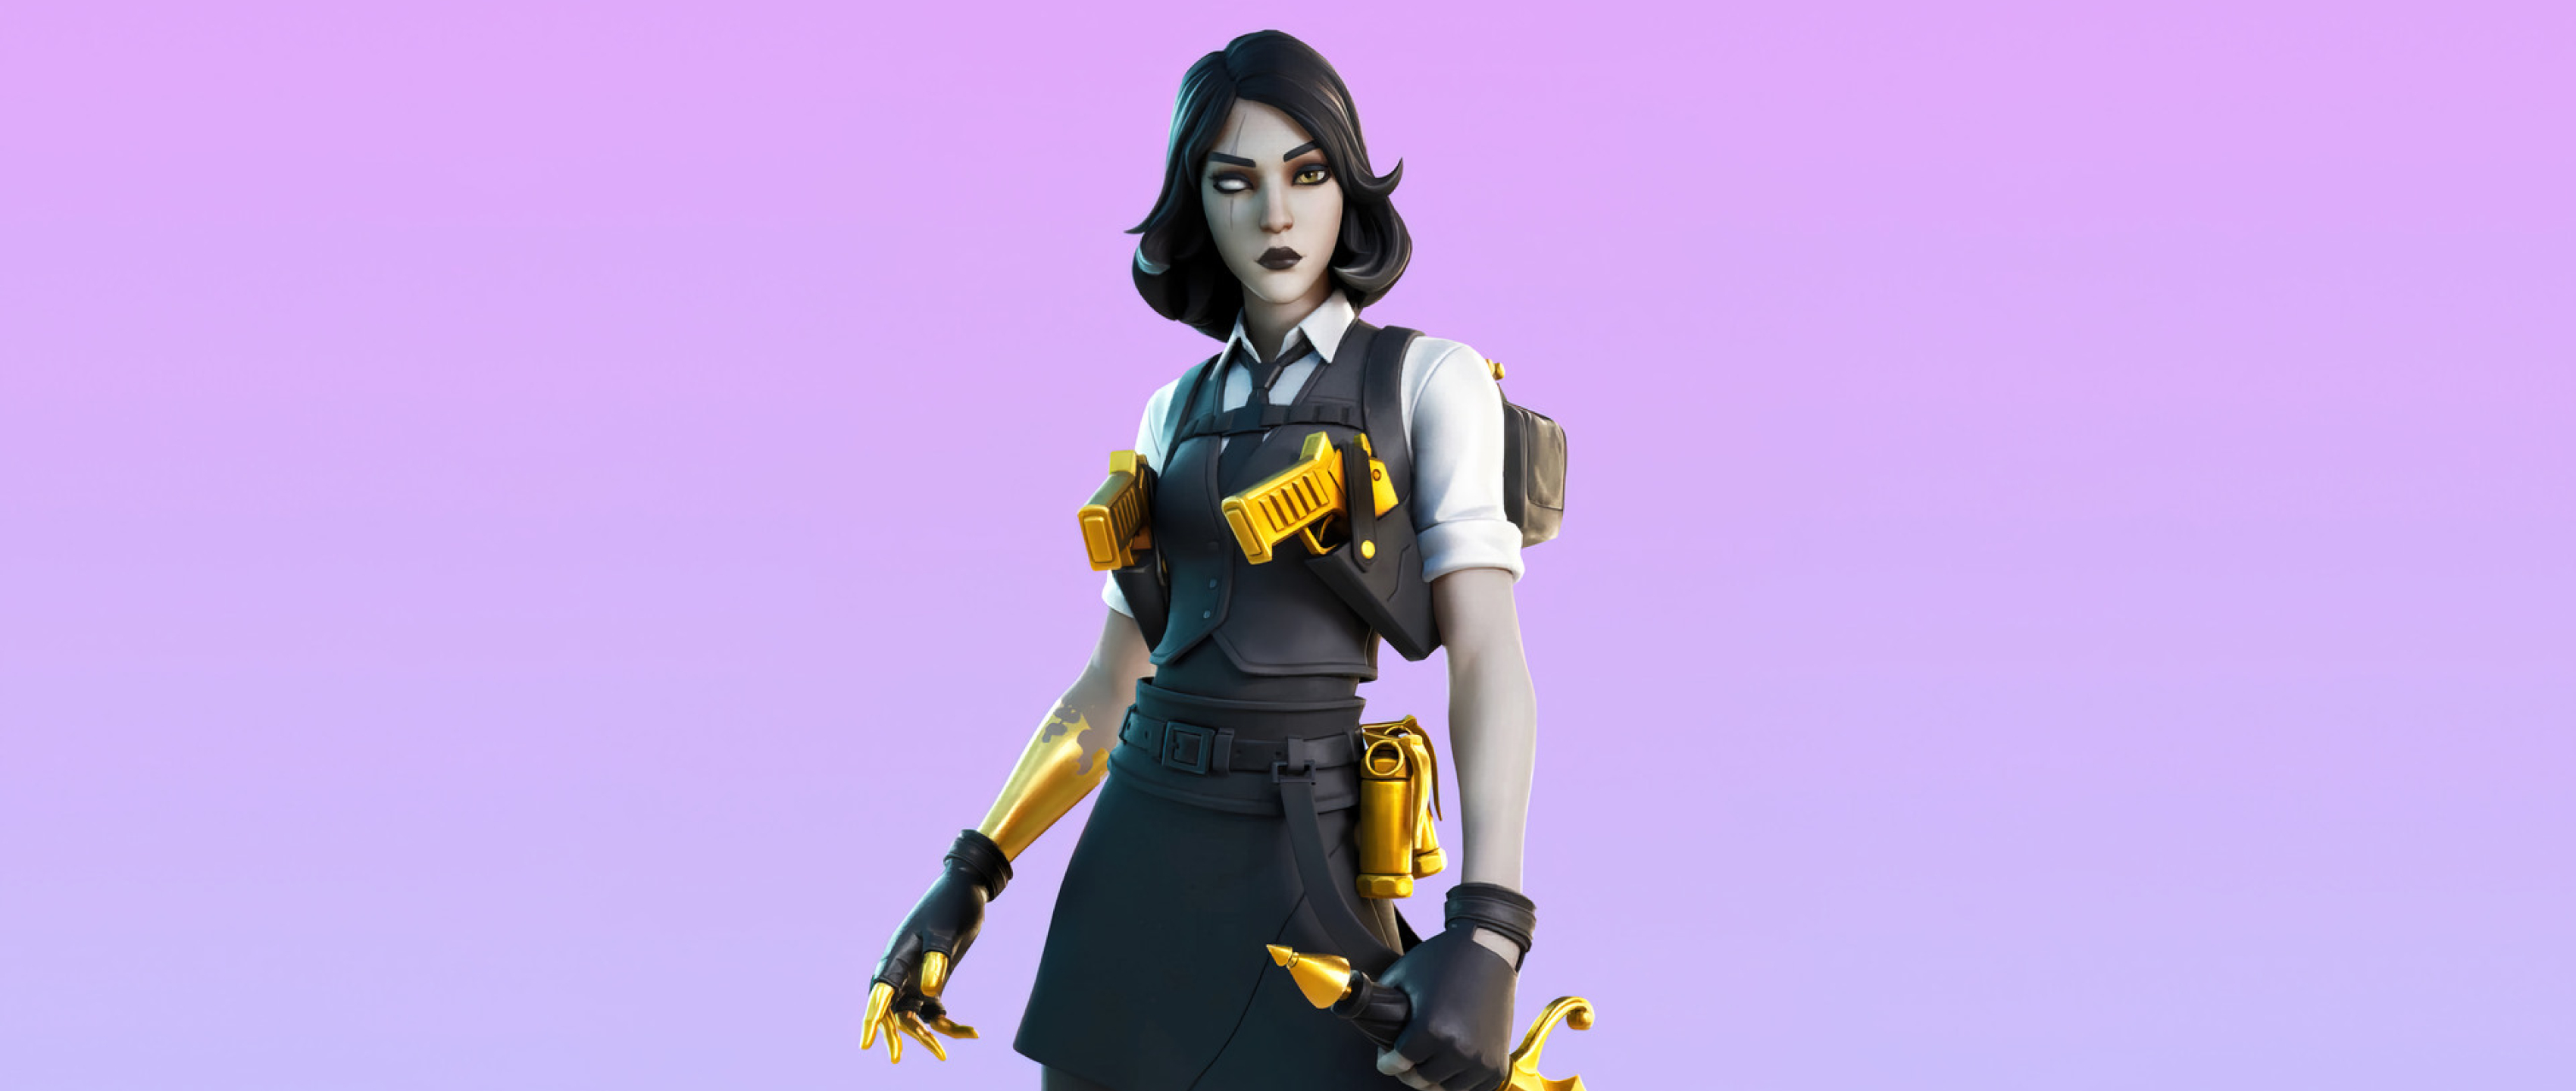 3400x1440 Resolution Fortnite Marigold Outfit Skin 3400x1440 Resolution ...